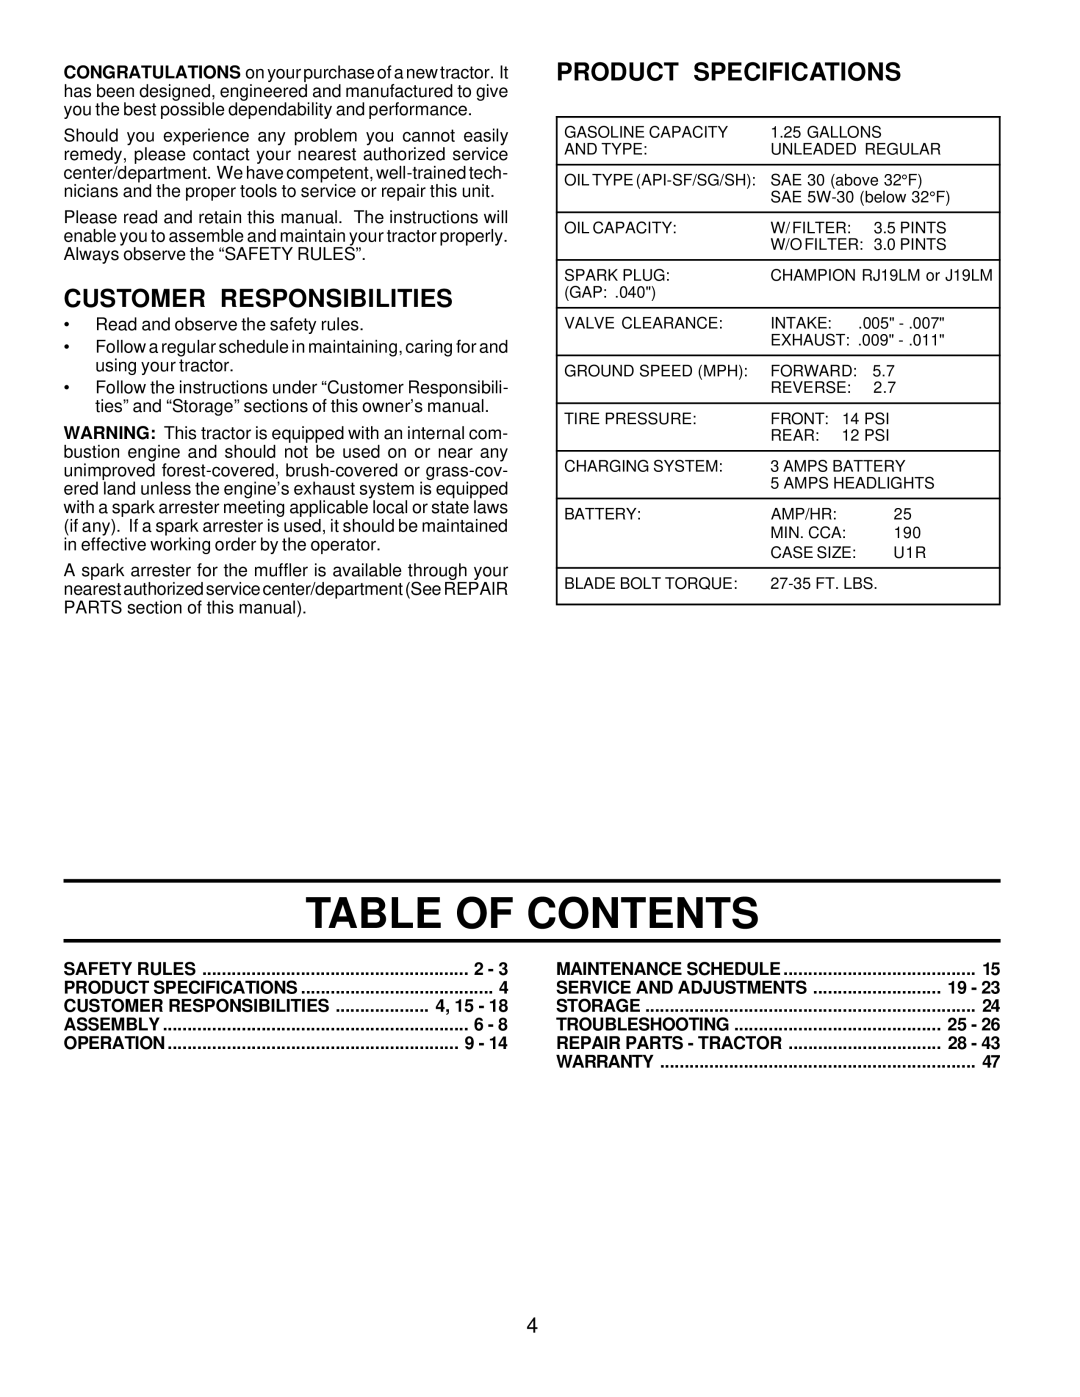 Husqvarna LTH120 owner manual Table Of Contents, Customer Responsibilities, Product Specifications 